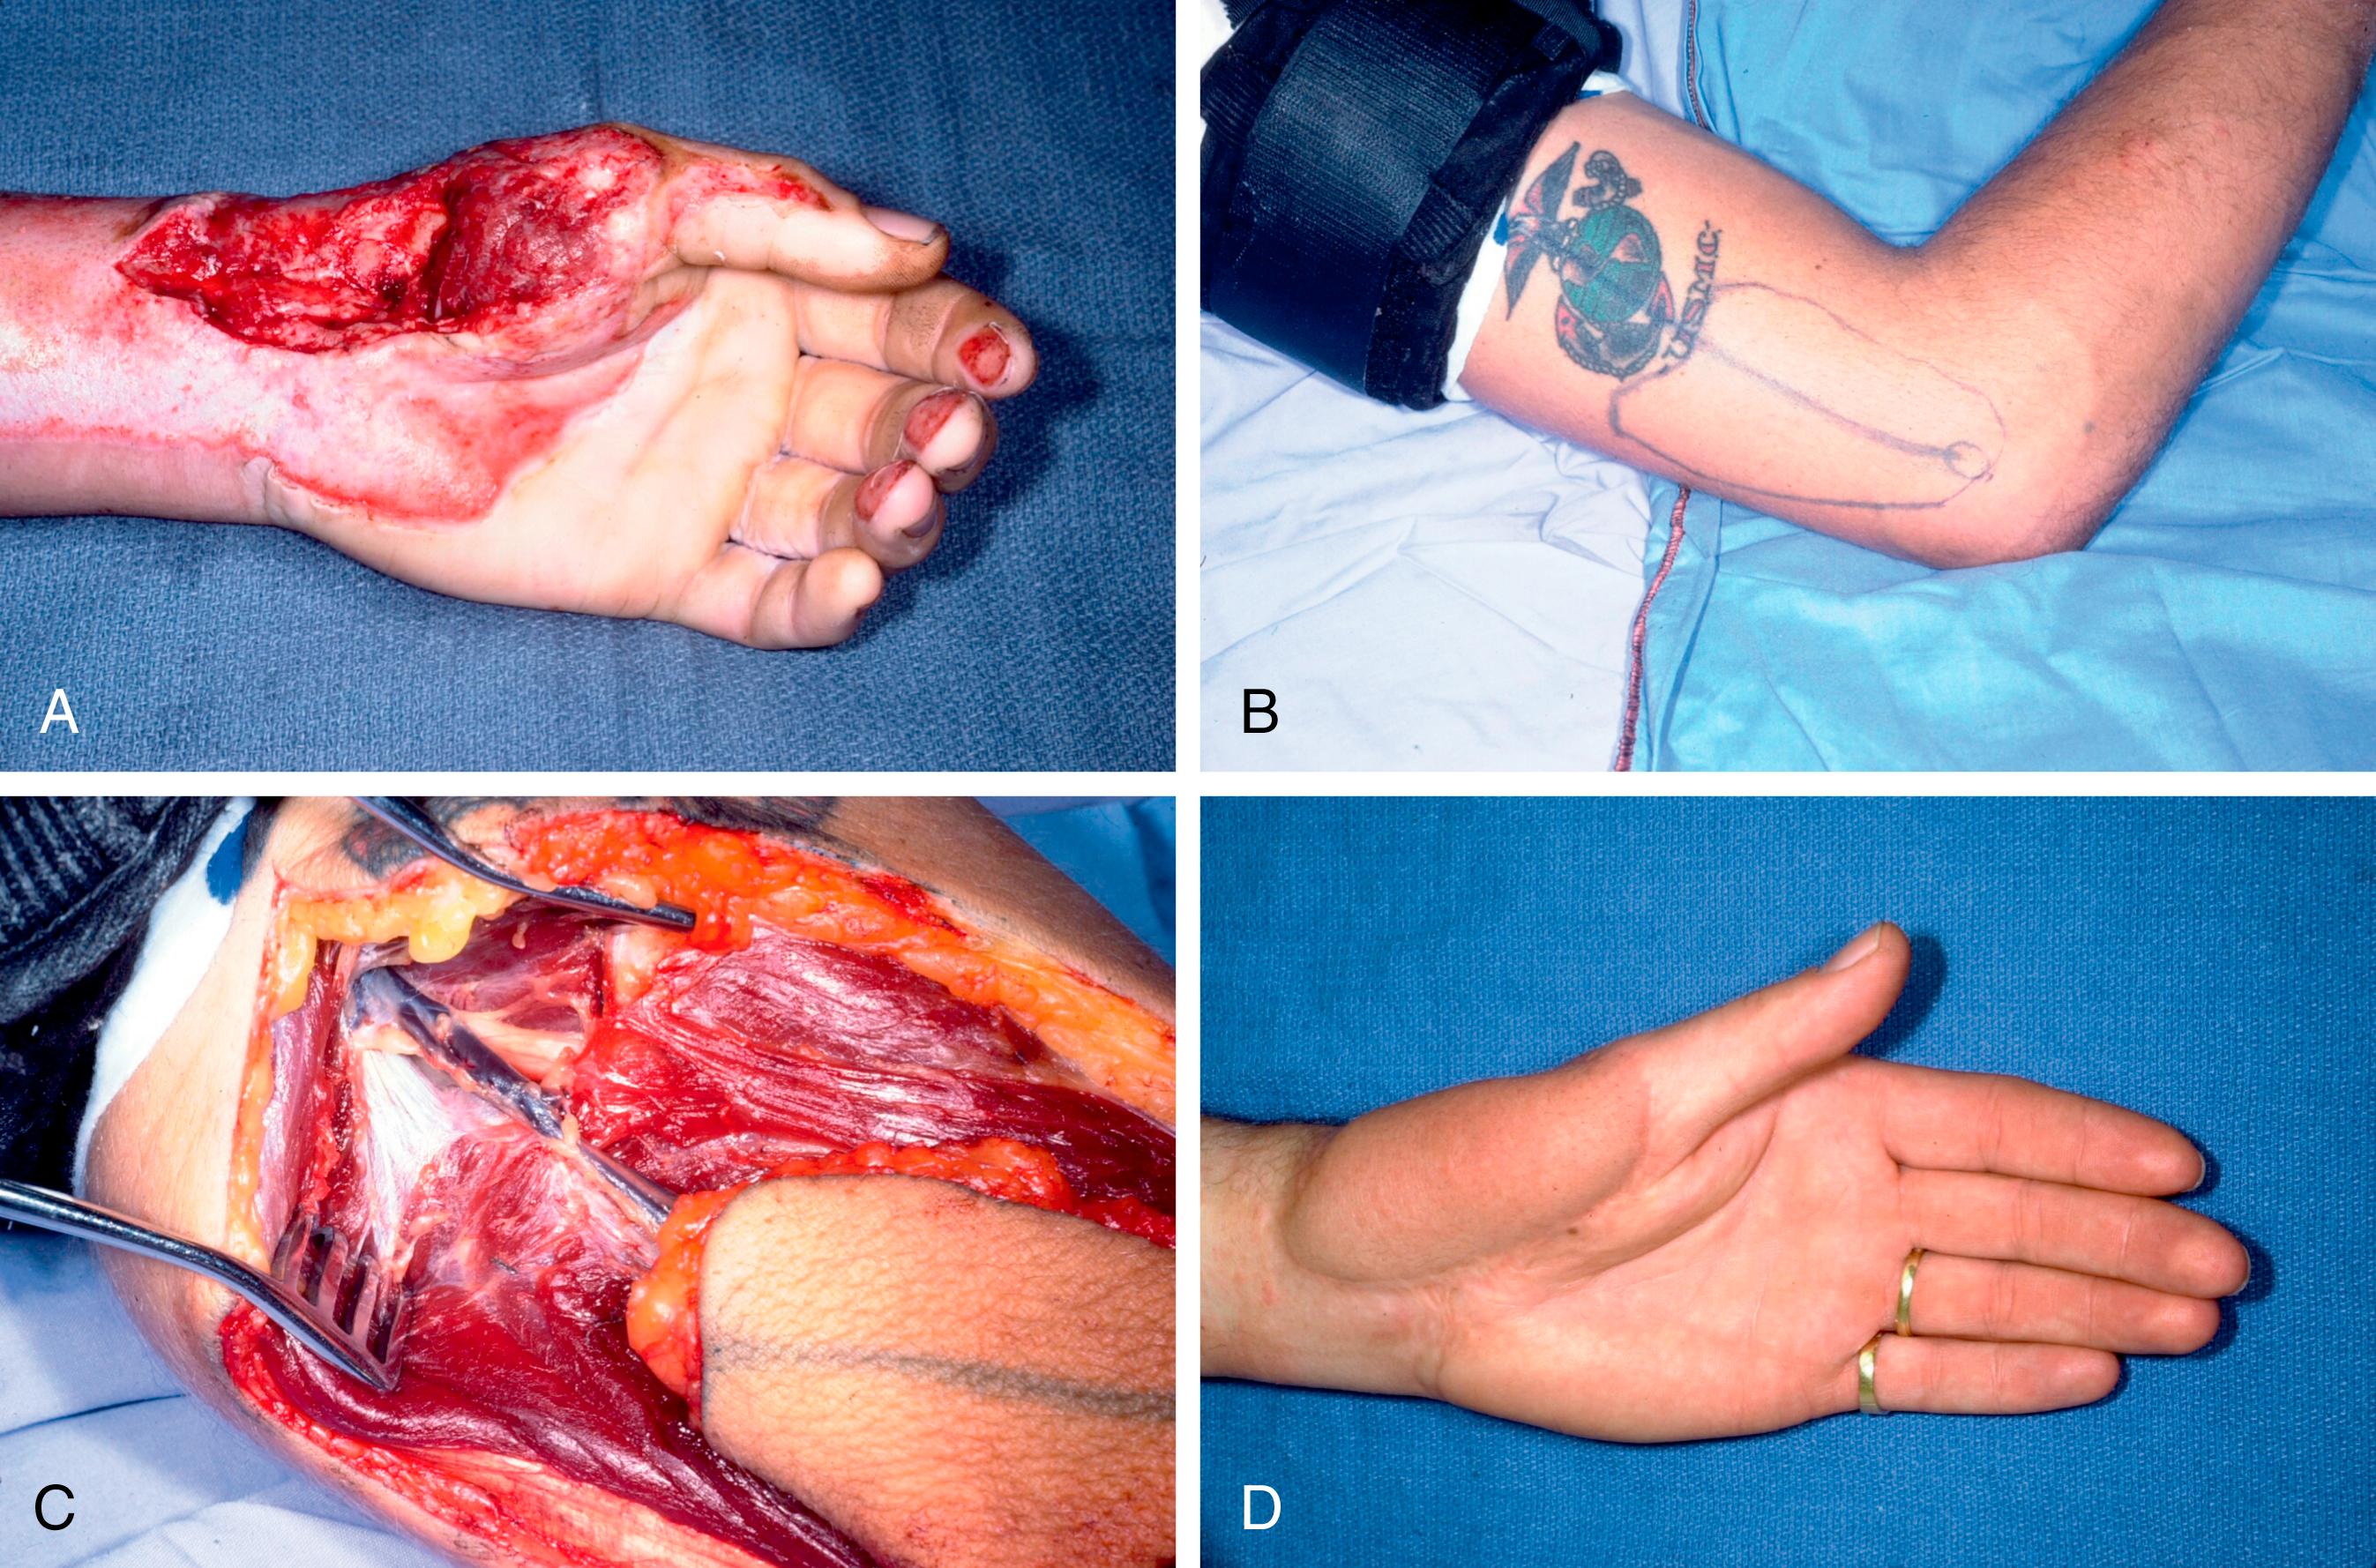 Fig. 45.4, Lateral arm flap. A, A 25-year-old man who sustained a thermal injury-avulsion of the soft tissues over the palmar aspect of his left wrist with an open wrist joint. B, Design of a lateral arm flap avoiding the tattoo. C, Dissection of the posterior radial collateral vascular pedicle in the septum between the brachialis anteriorly and the triceps posteriorly. The radial nerve can be seen in the superior aspect of the incision. D, Postoperative appearance of the healed lateral arm flap over the palmar aspect of the wrist and thumb.